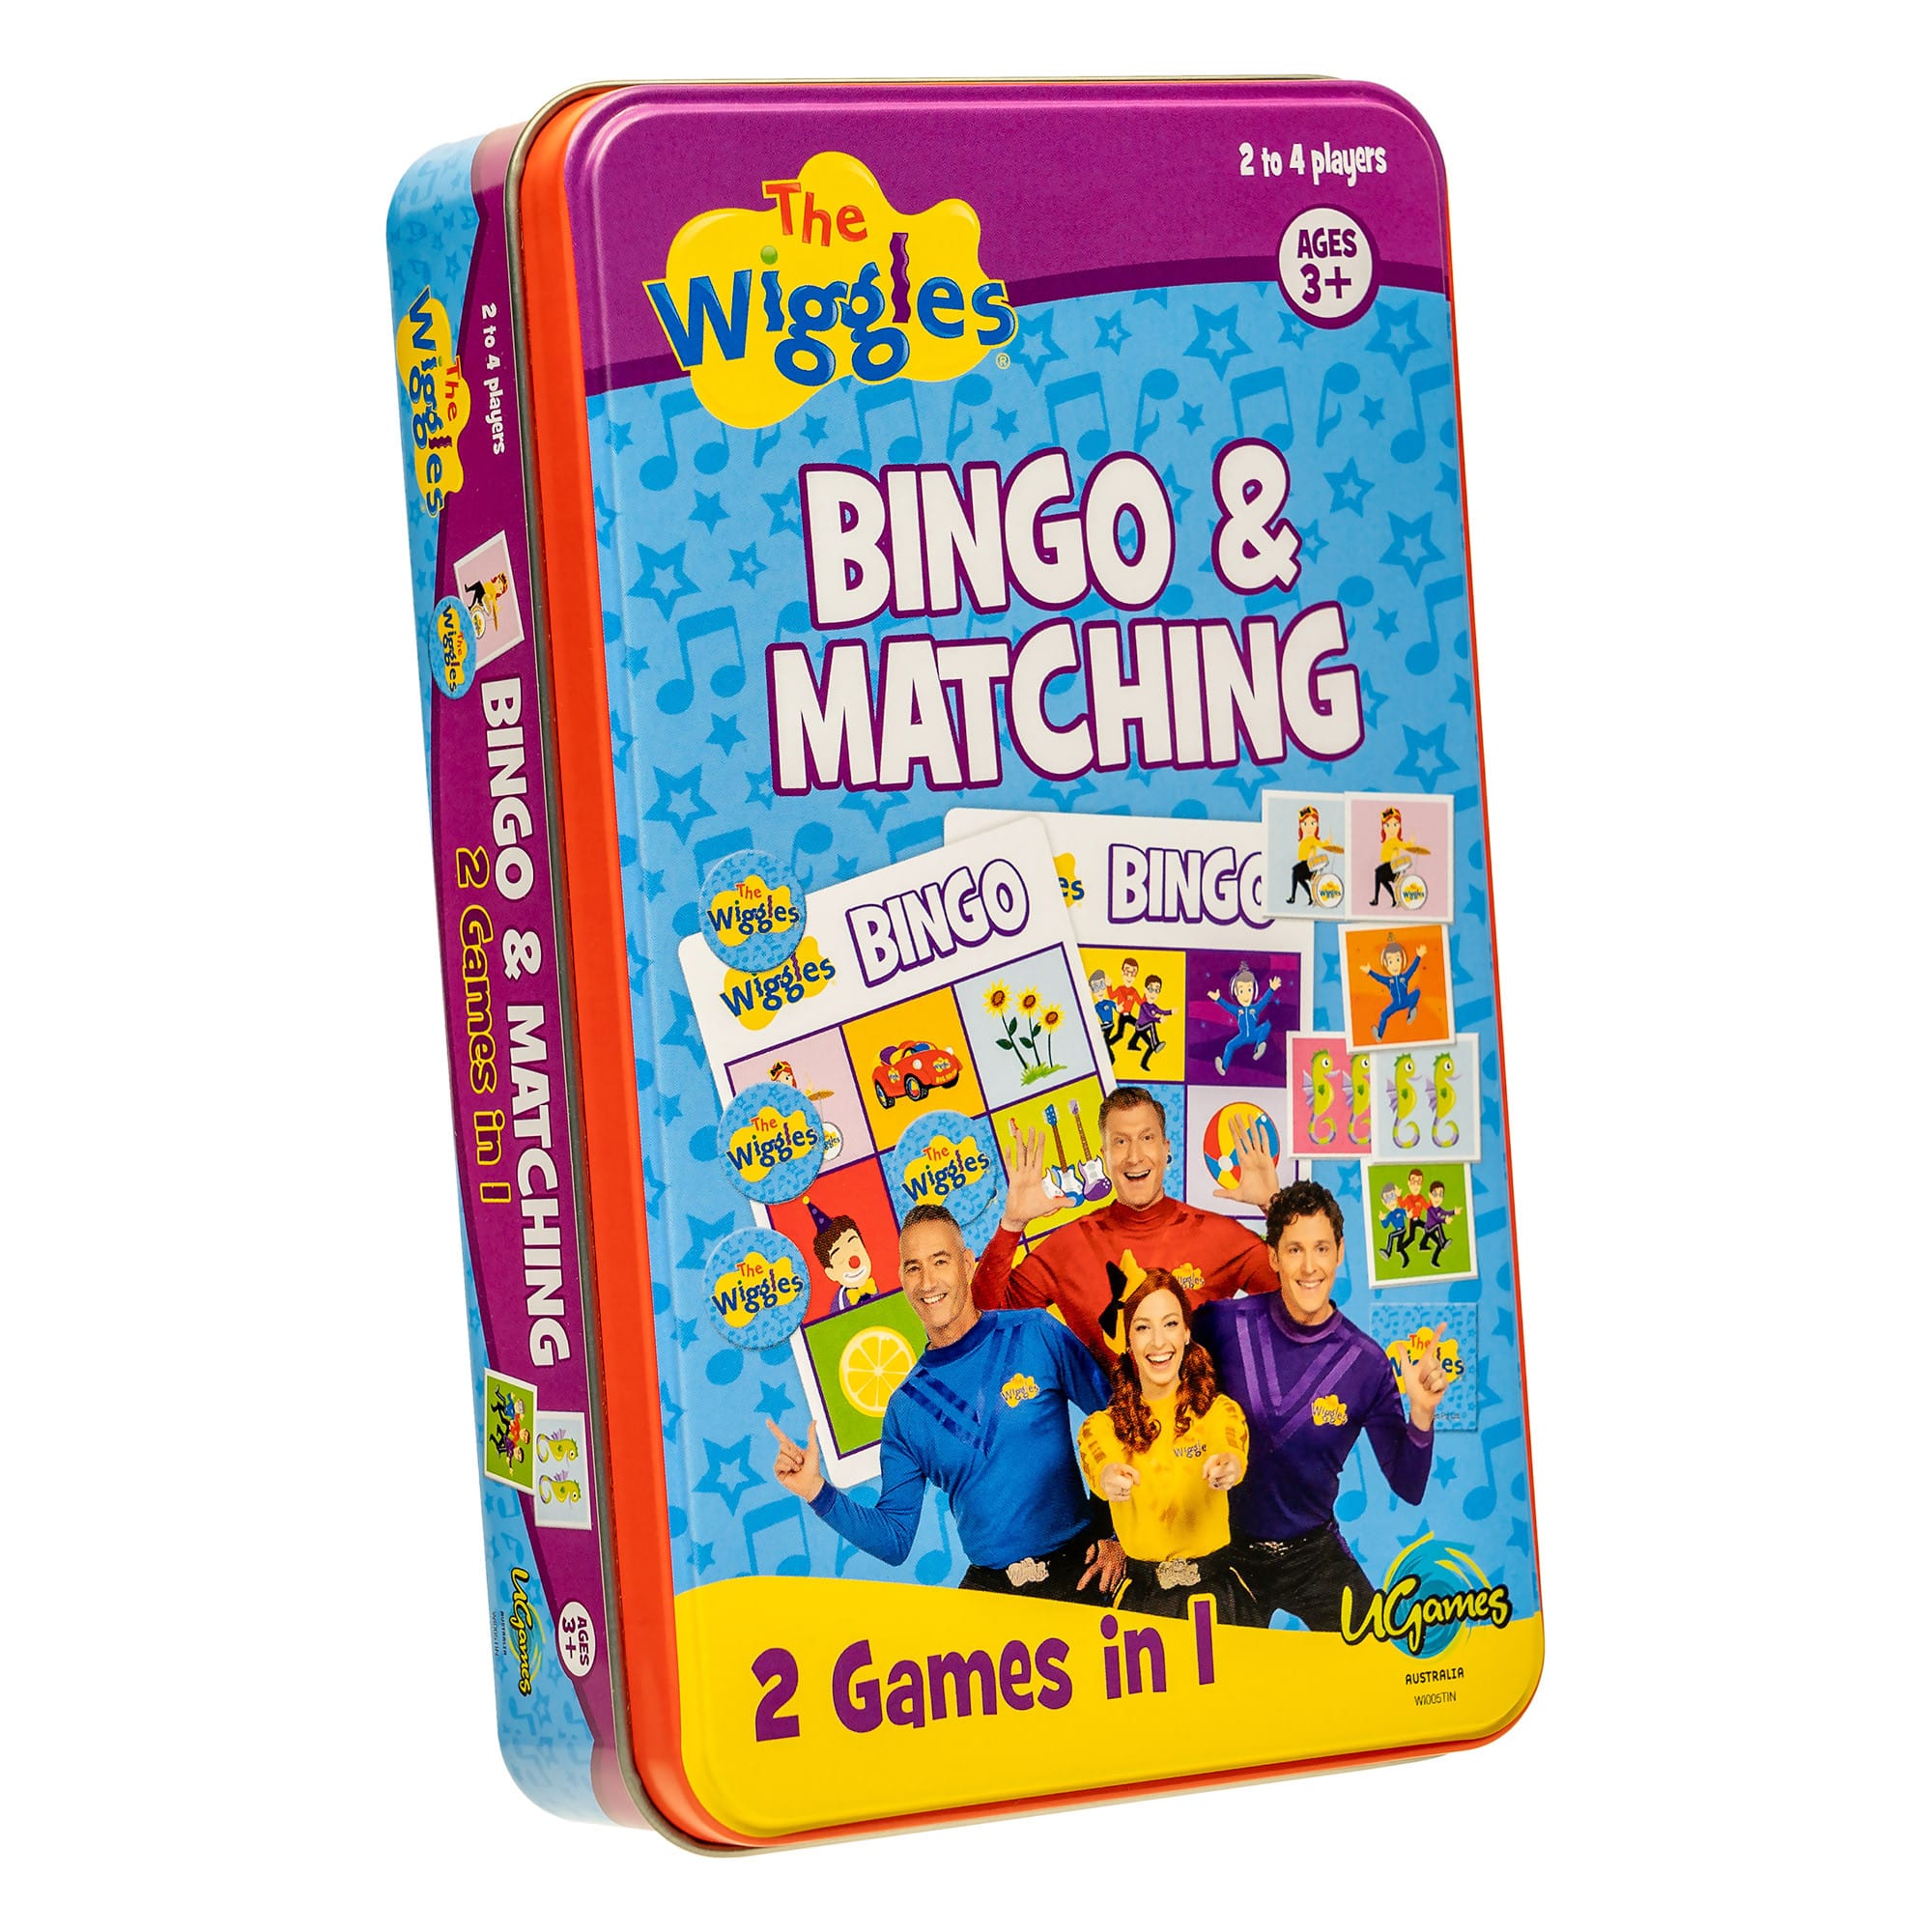 The Wiggles - Bingo And Matching 2-In-1 Game